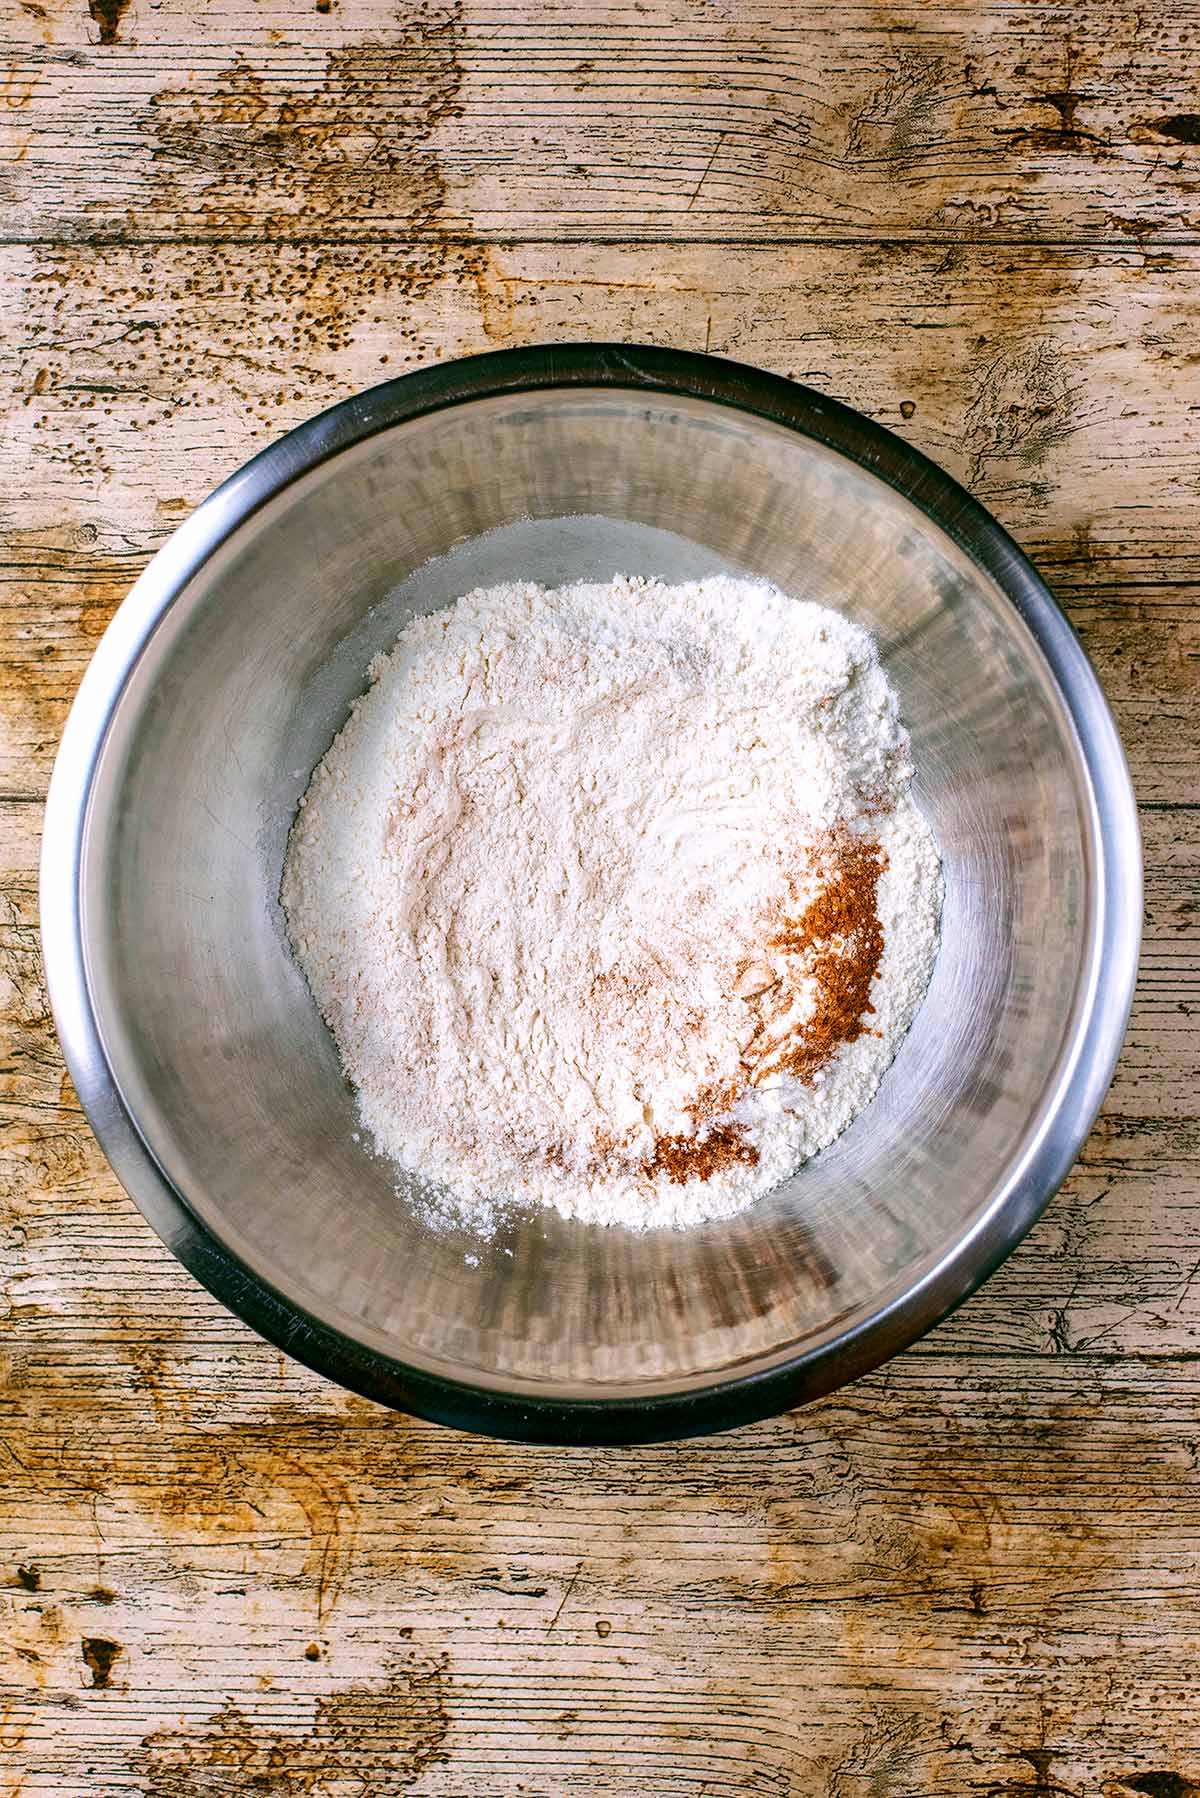 A mixing bowl containing flour and cinnamon.